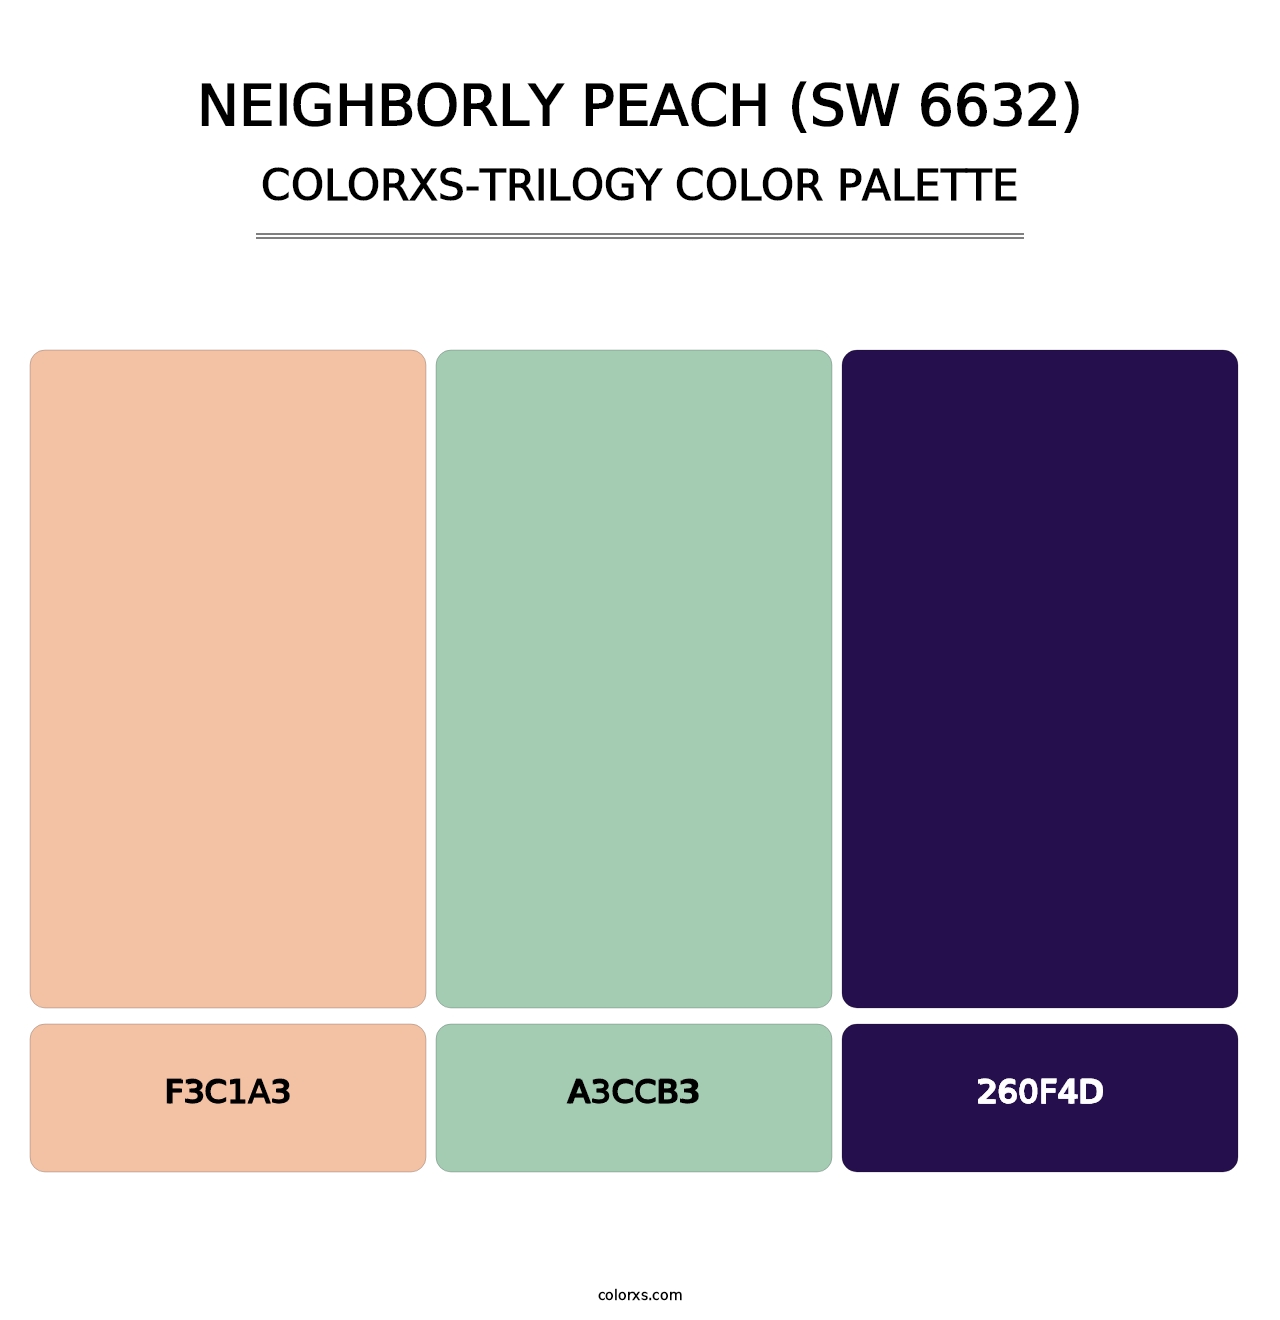 Neighborly Peach (SW 6632) - Colorxs Trilogy Palette